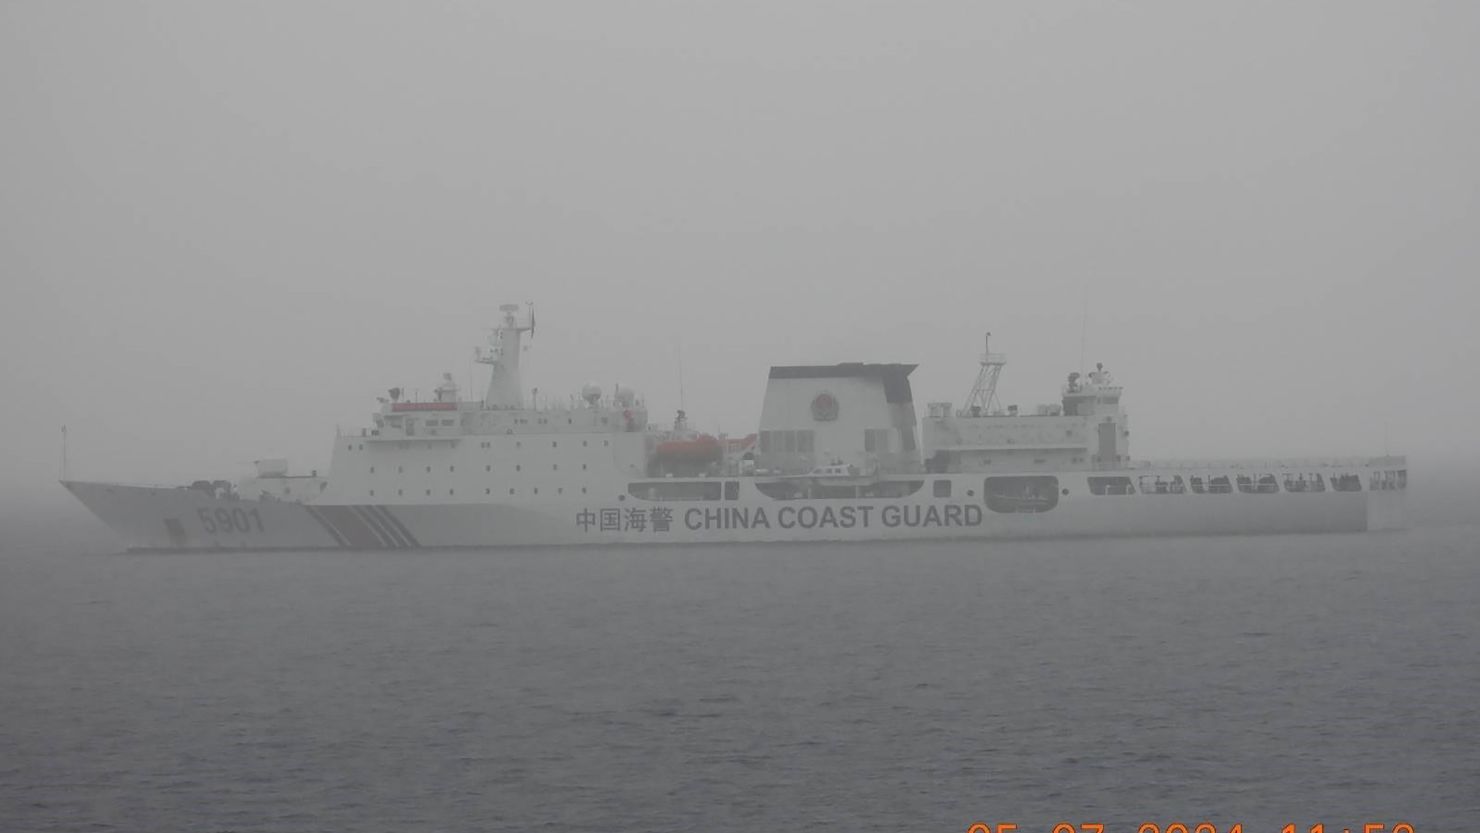 The China Coast Guard ship 5901 is shown on July 5 in an image posted by the Philippine Coast Guard on X.